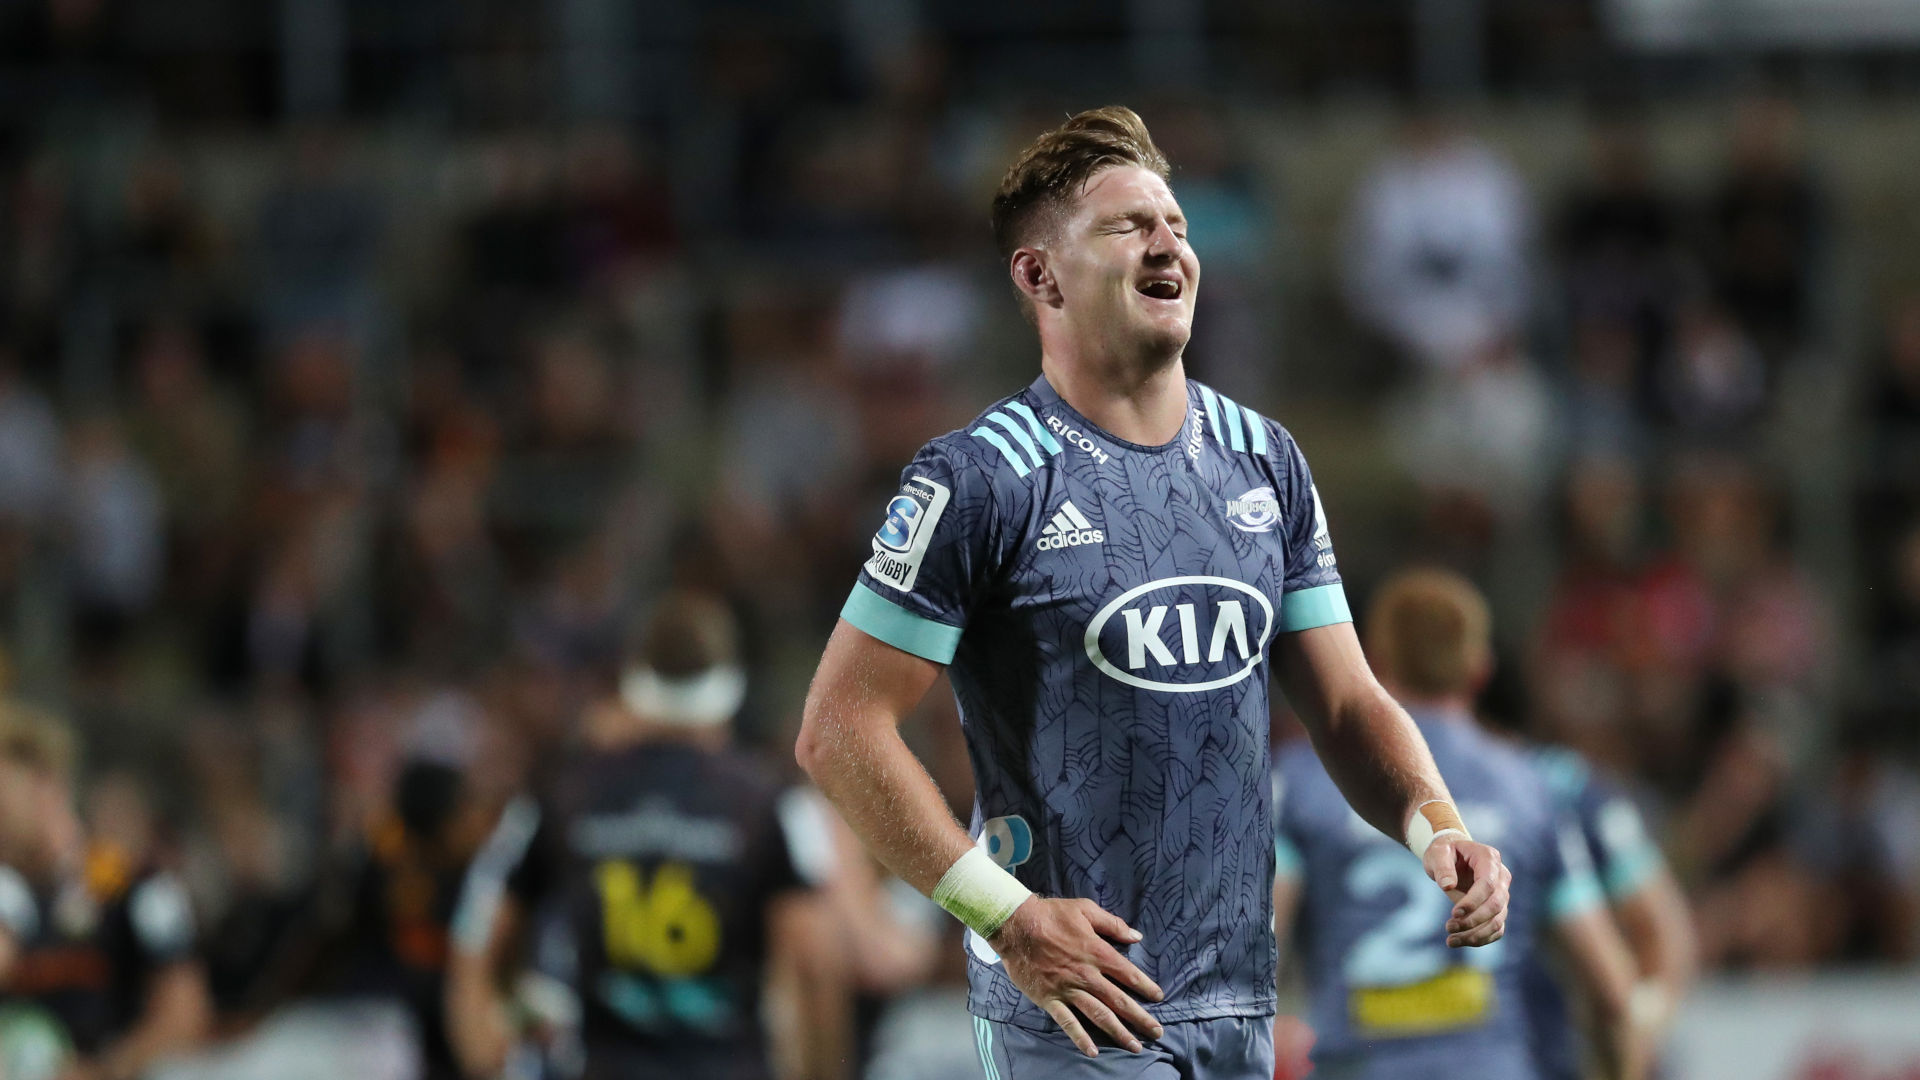 SA Rugby Mag takes a look at the past weekend's Super Rugby showings